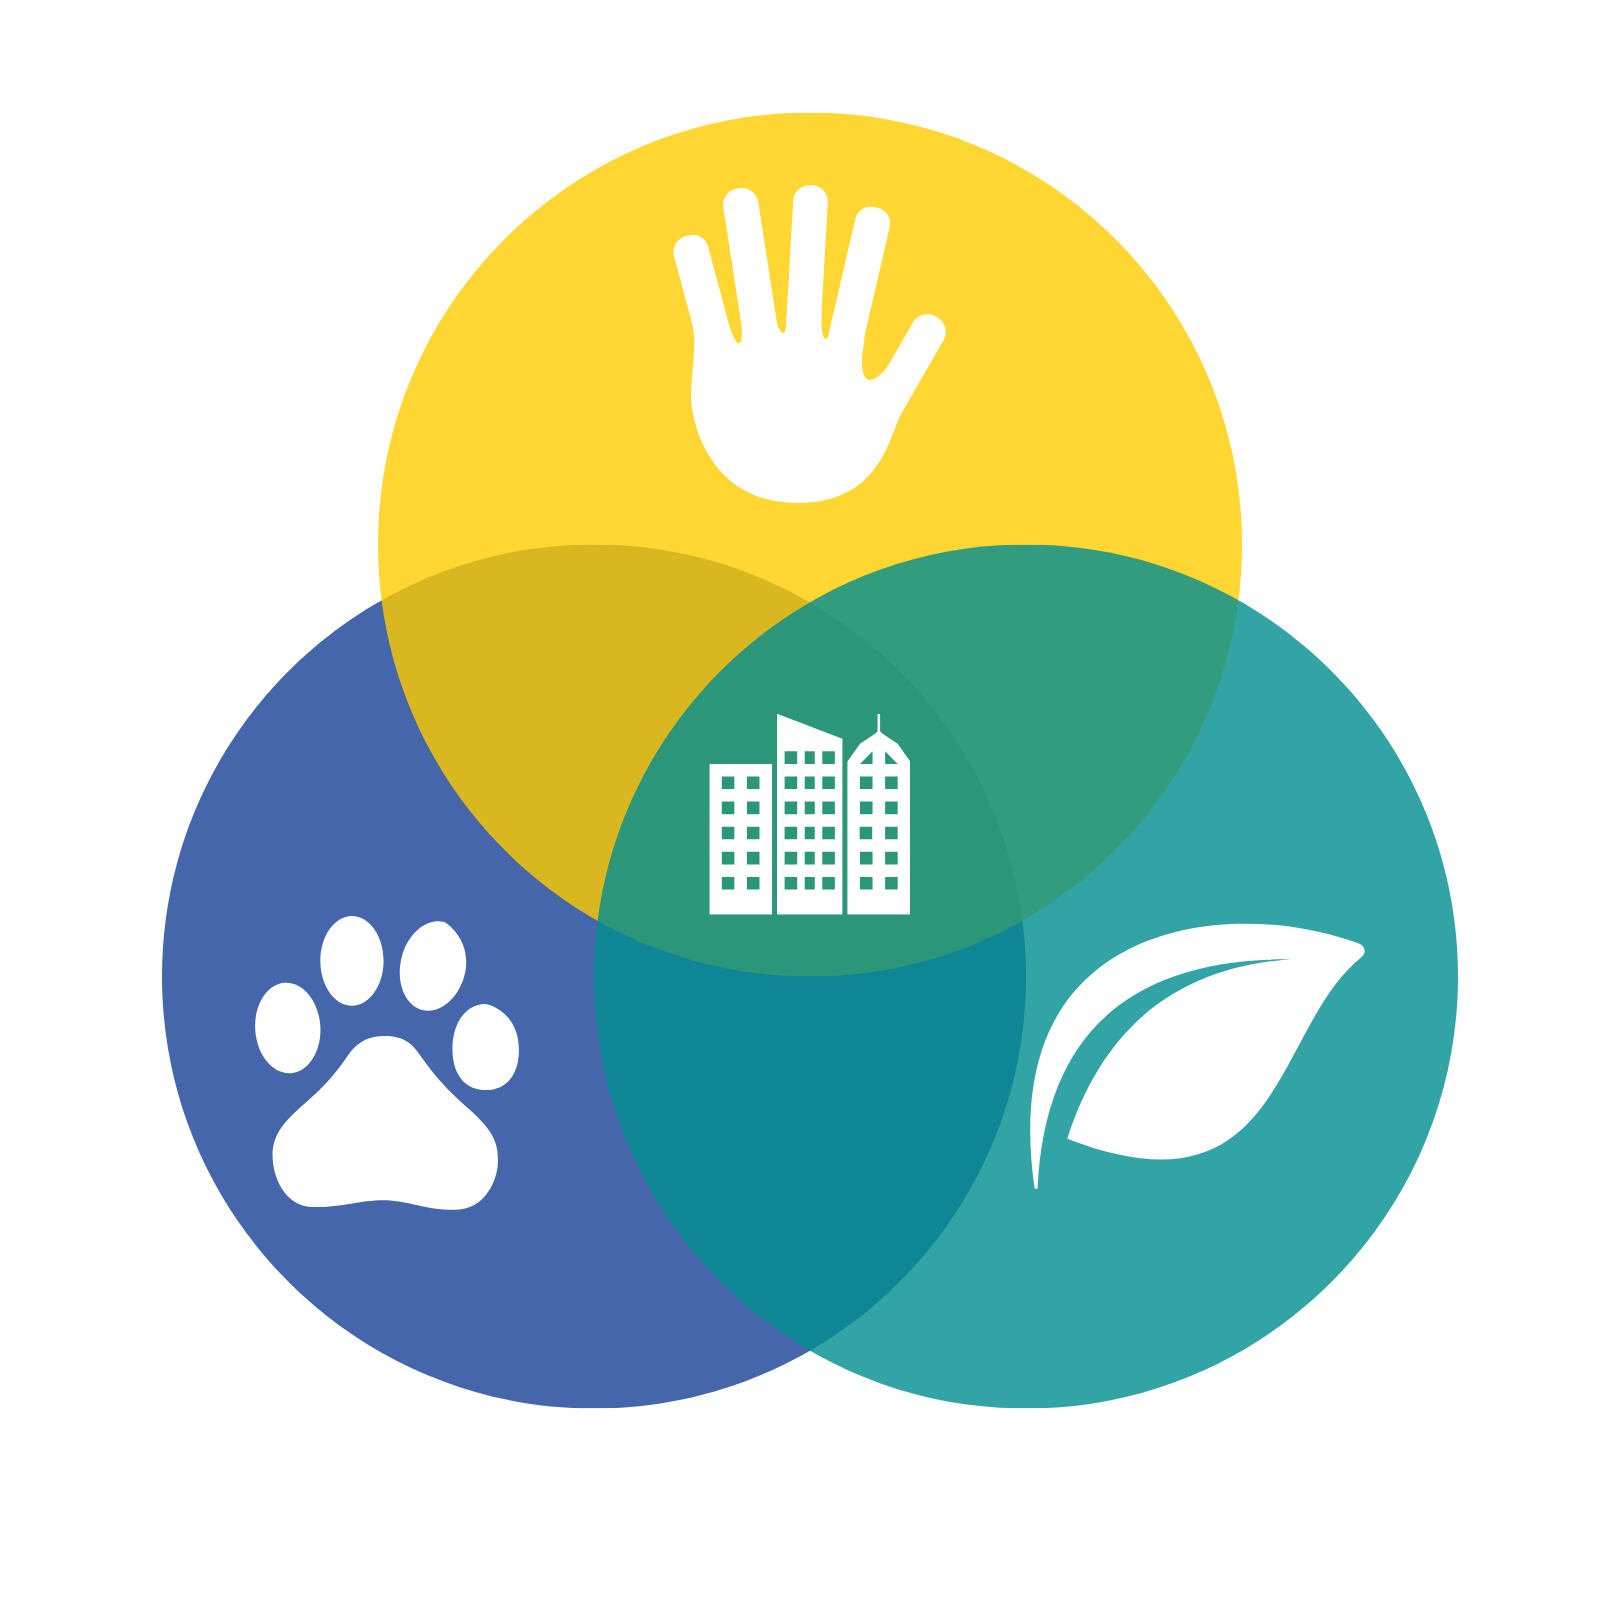 Avatar of One Health 4 Cities Network